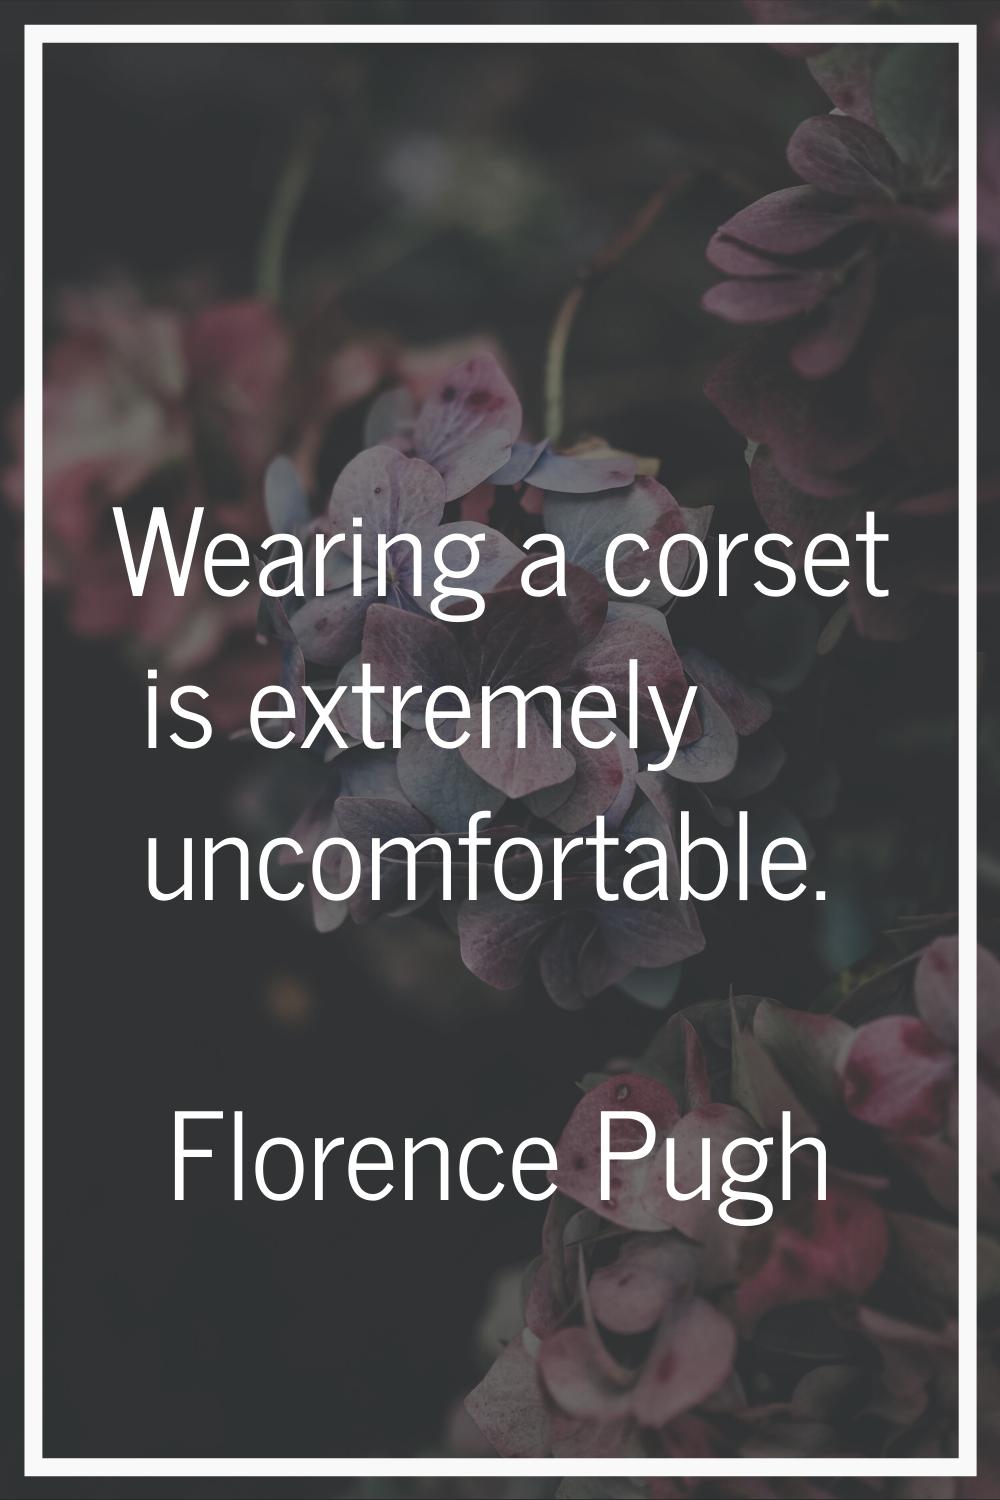 Wearing a corset is extremely uncomfortable.